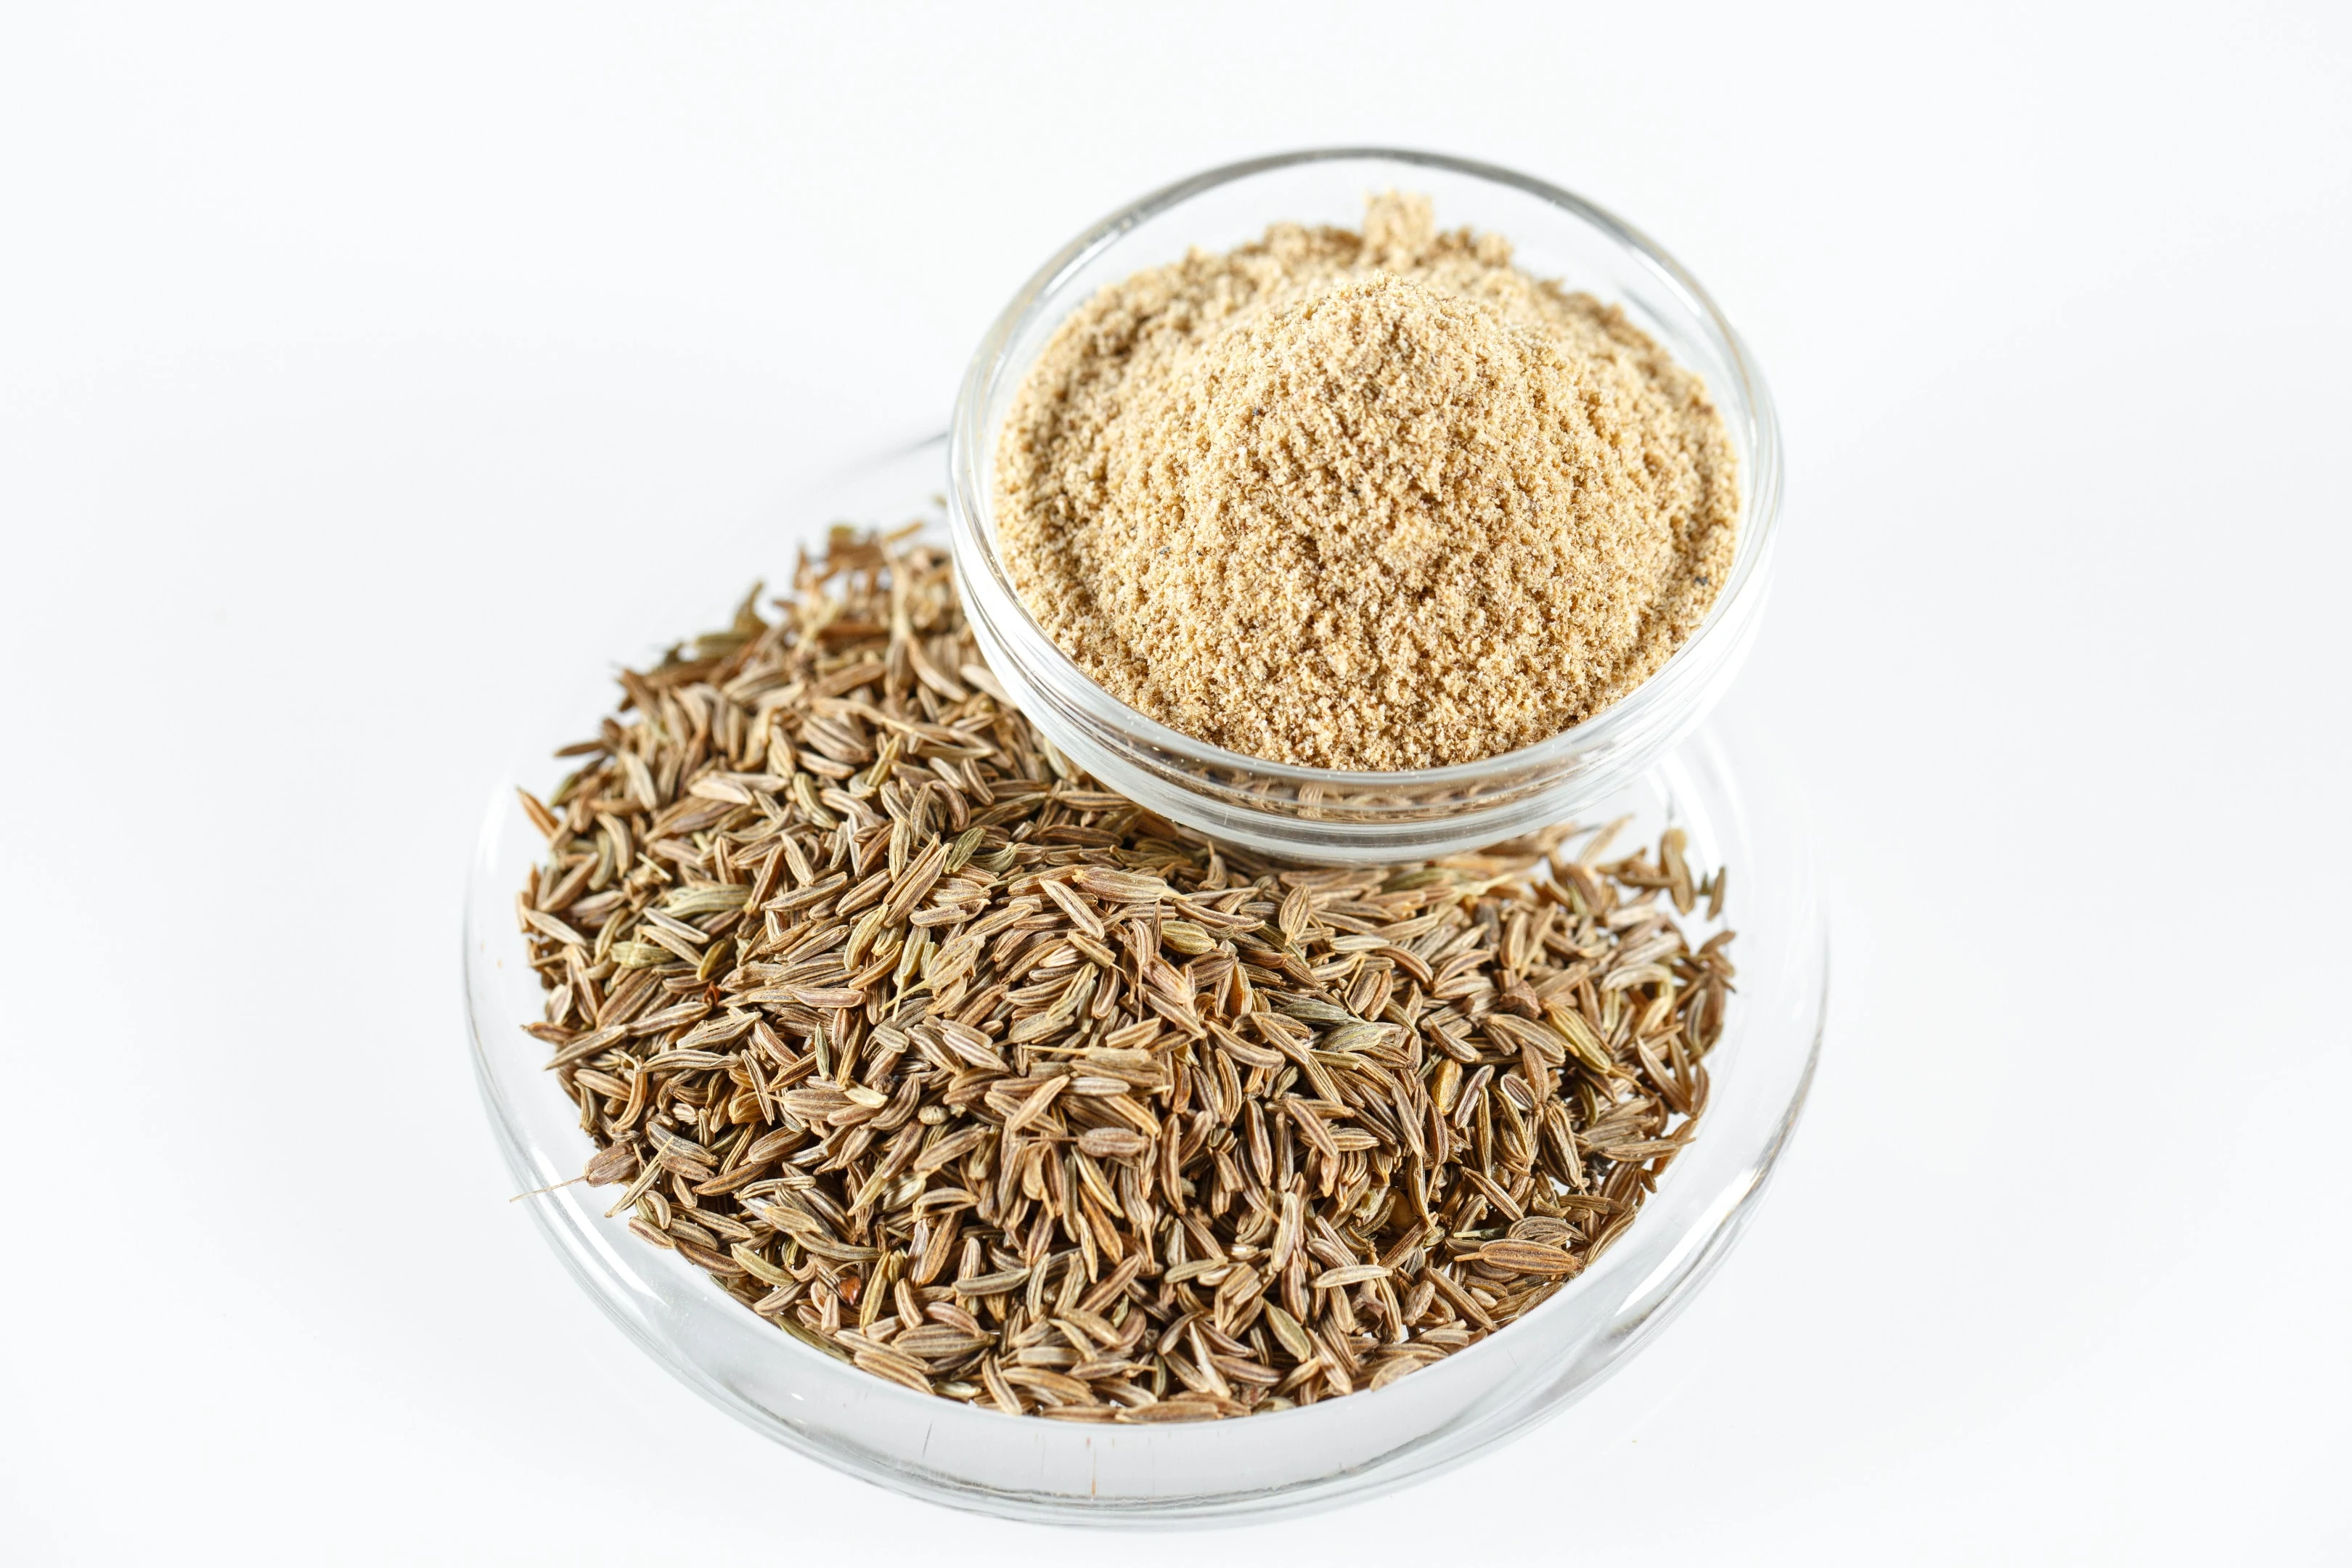 Cumin seeds and ground cumin in bowls